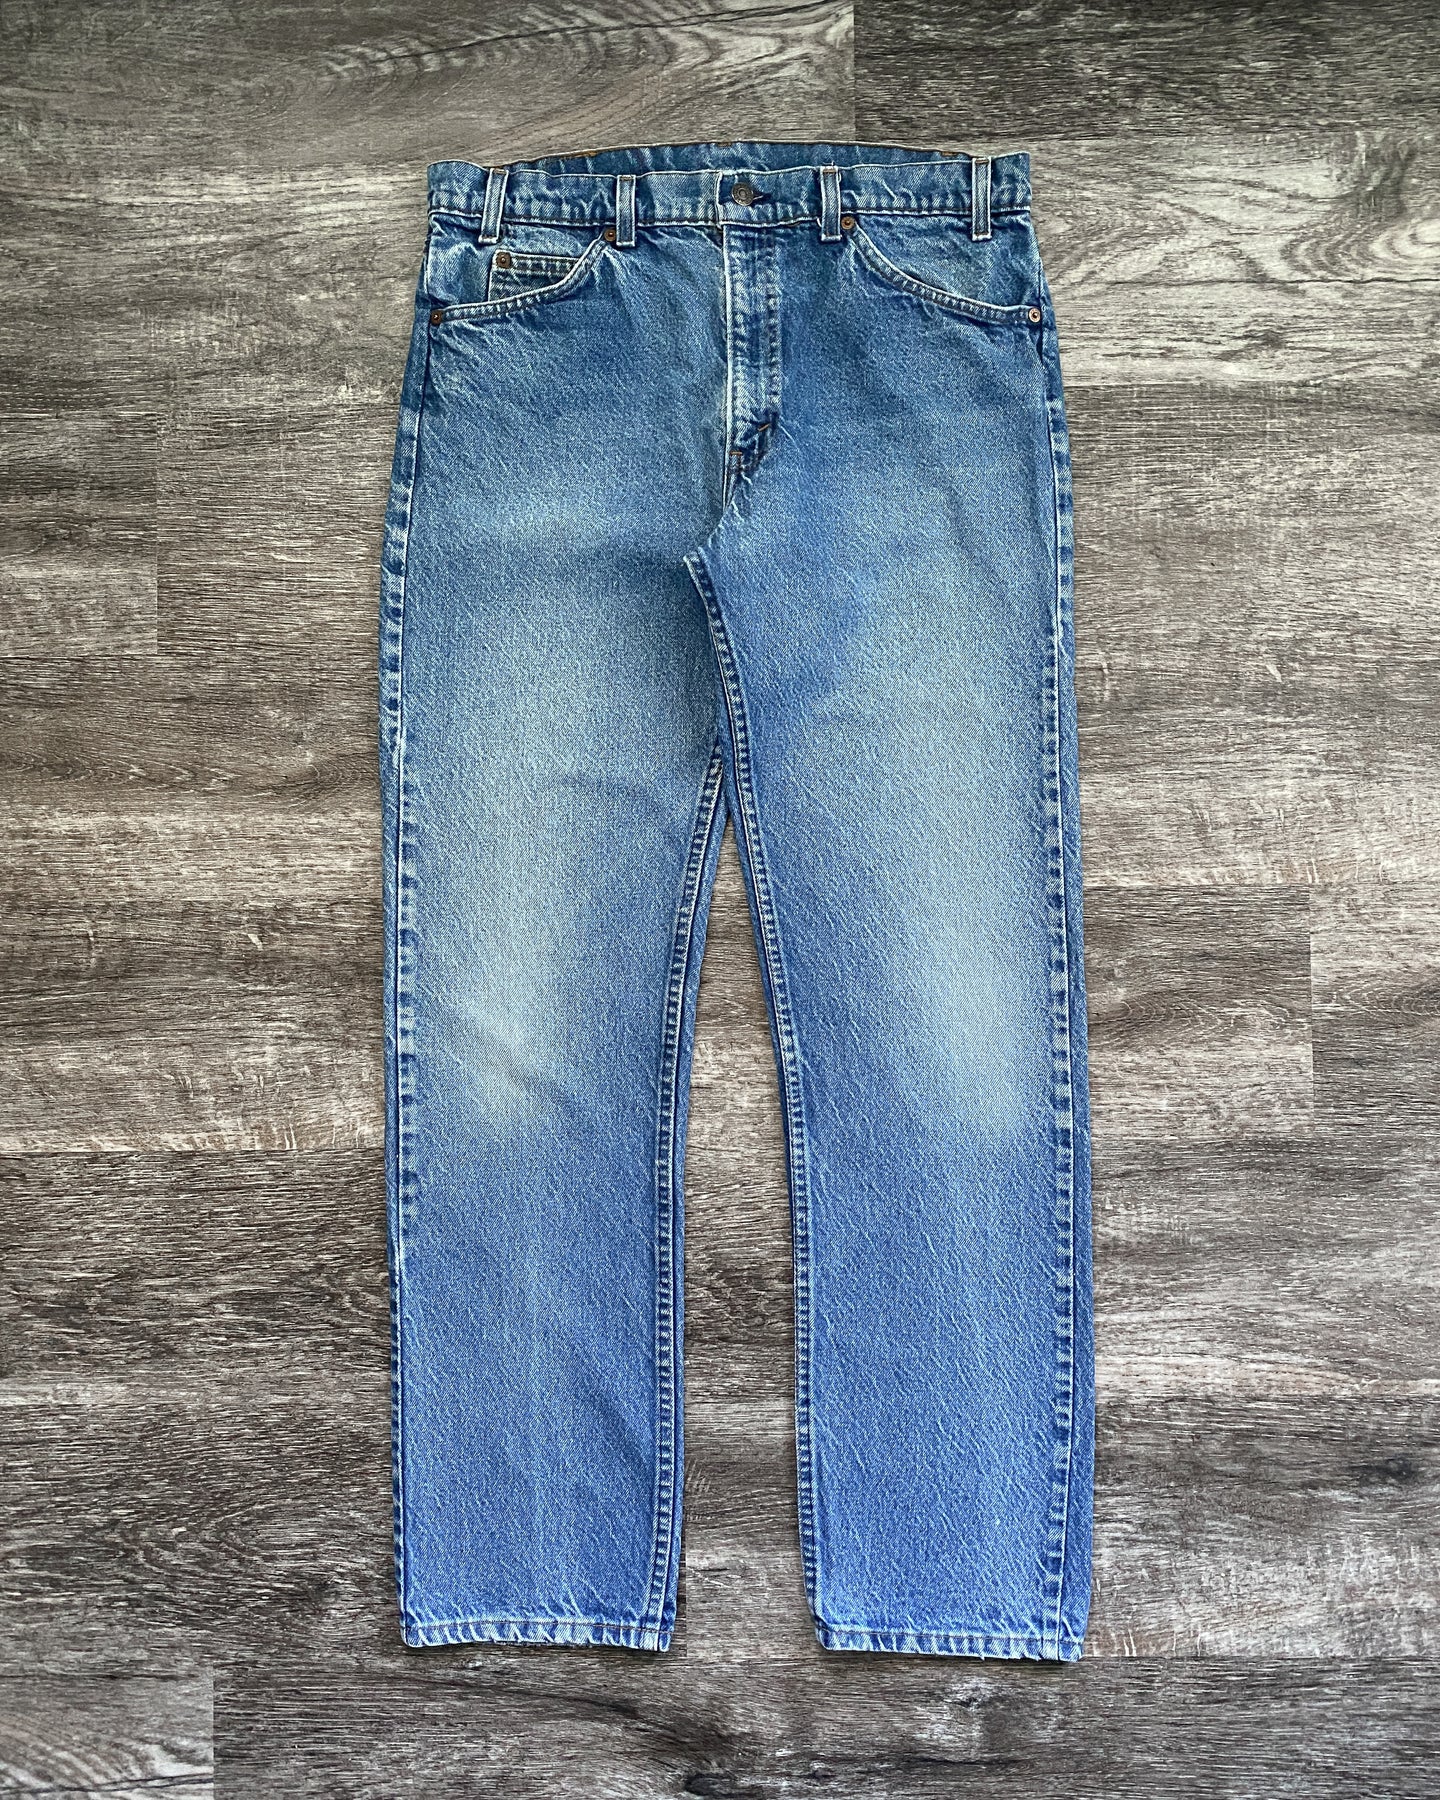 1970s Levi's Well Worn 505 - Size 34 x 31